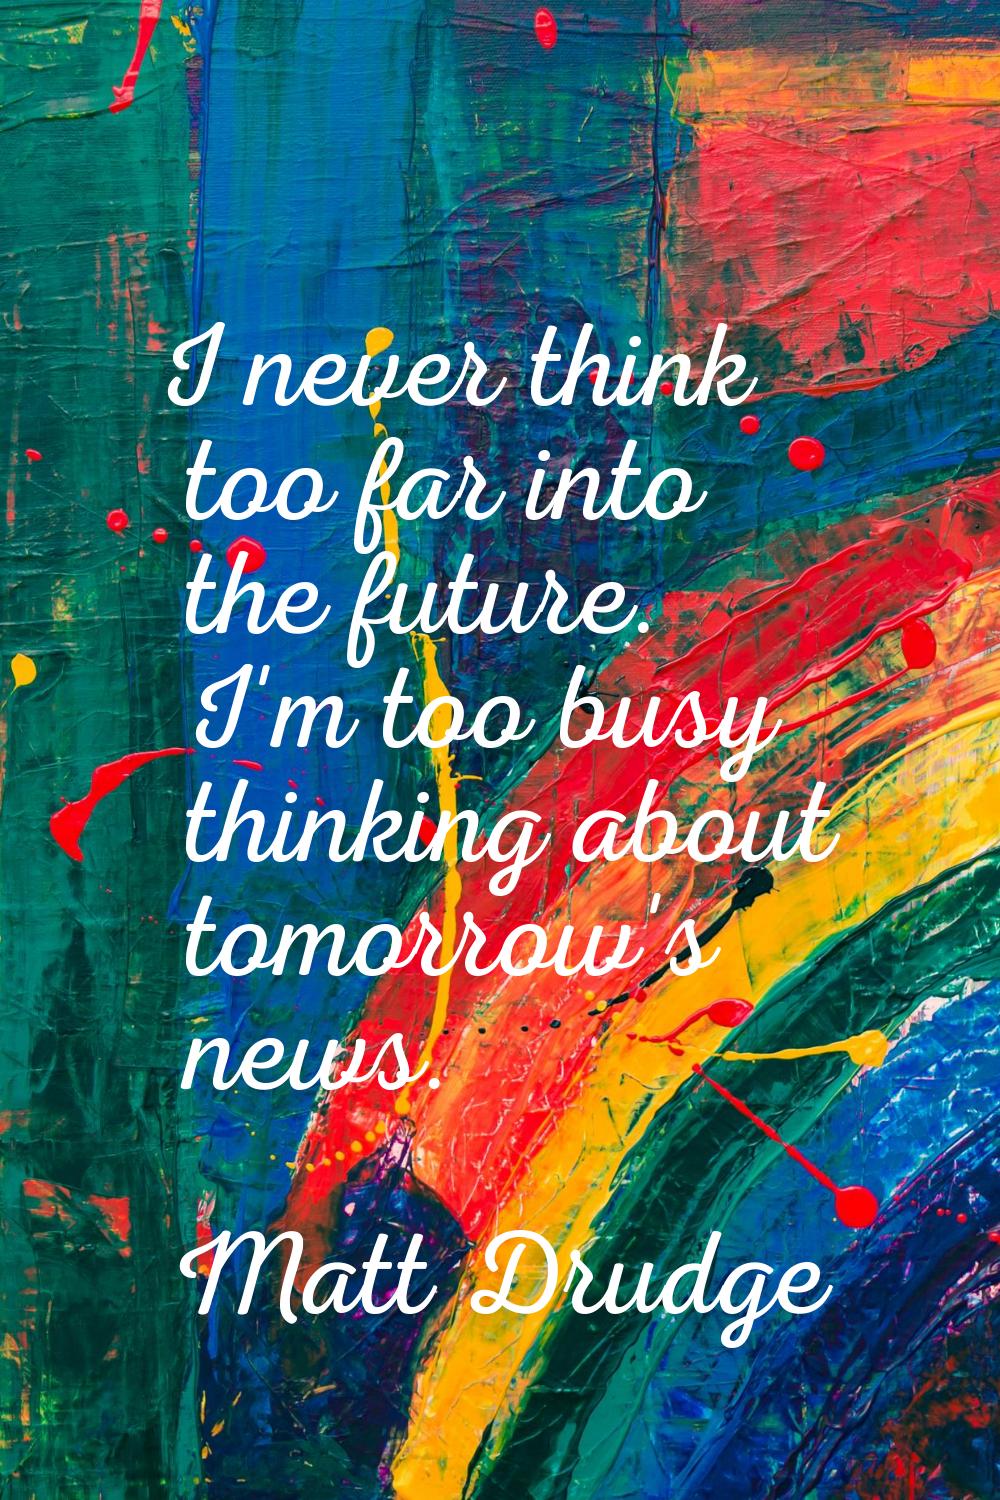 I never think too far into the future. I'm too busy thinking about tomorrow's news.